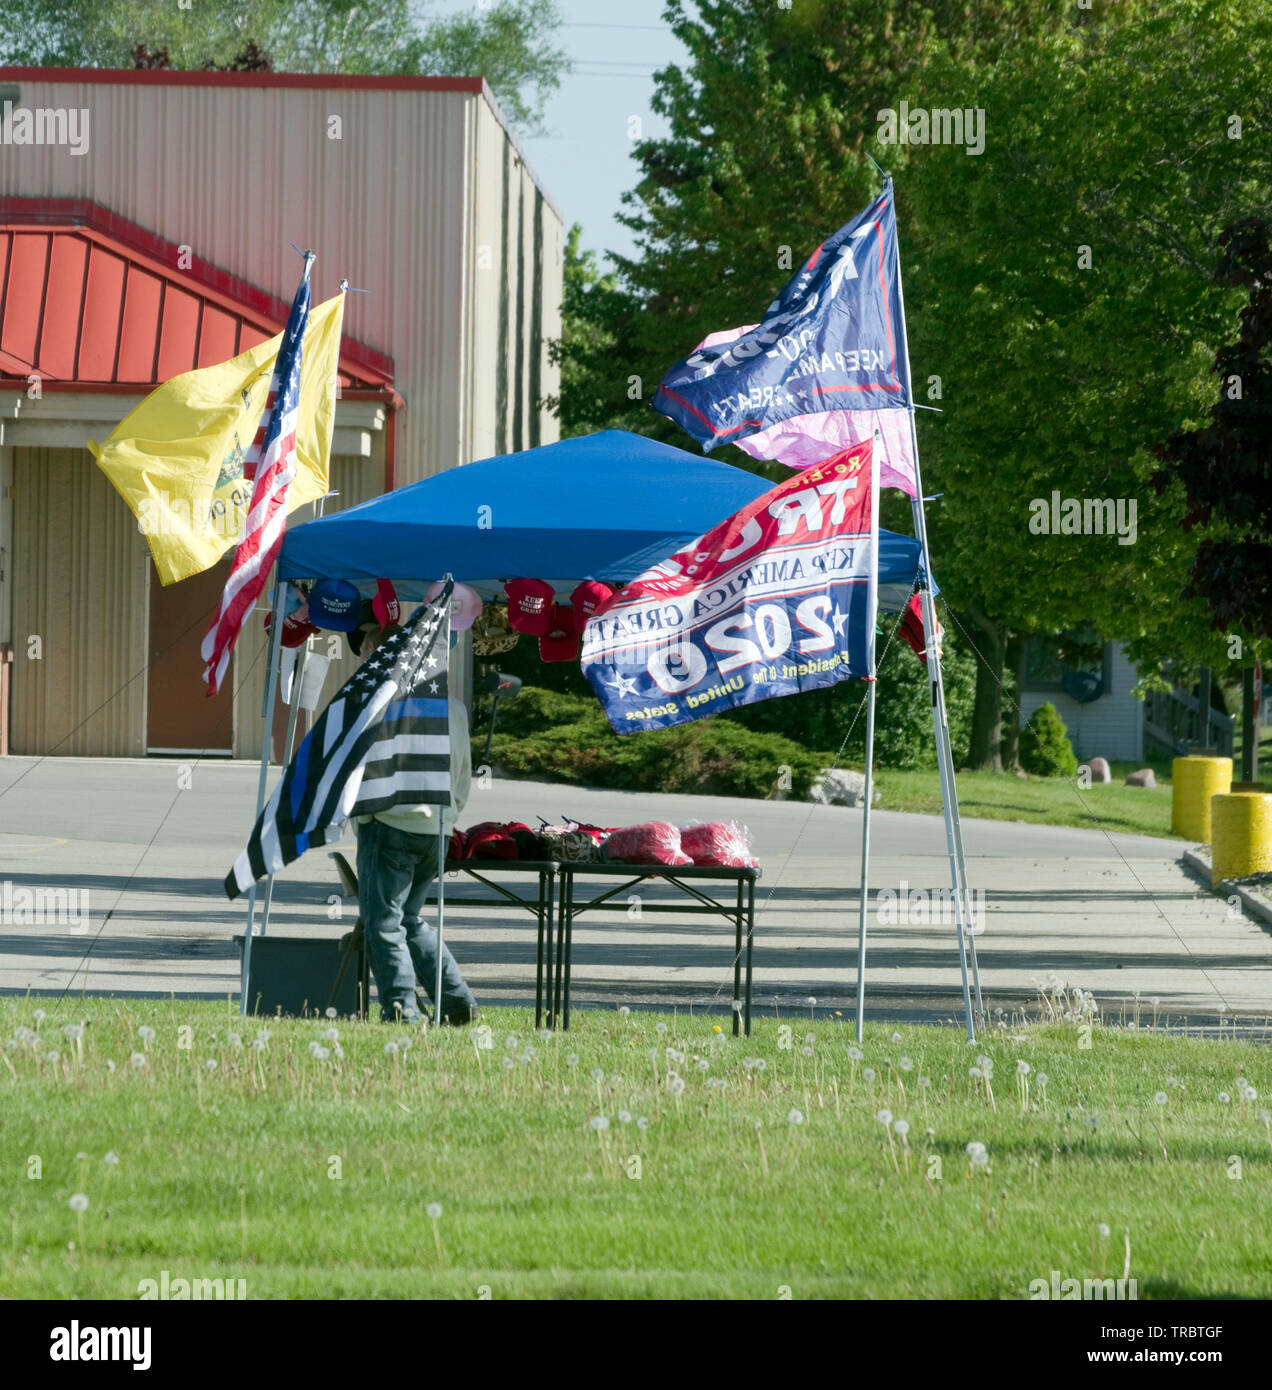 Manitowoc, Wisconsin USA, 2nd June, 2019.  Donald Trump 2020 reelection campaign getting off to an early start in Manitowoc.  Street vendor displays various American flags and Keep America Great Hats as well as campaign literature.   Credit: Jerome Wilson/Alamy Stock Photo